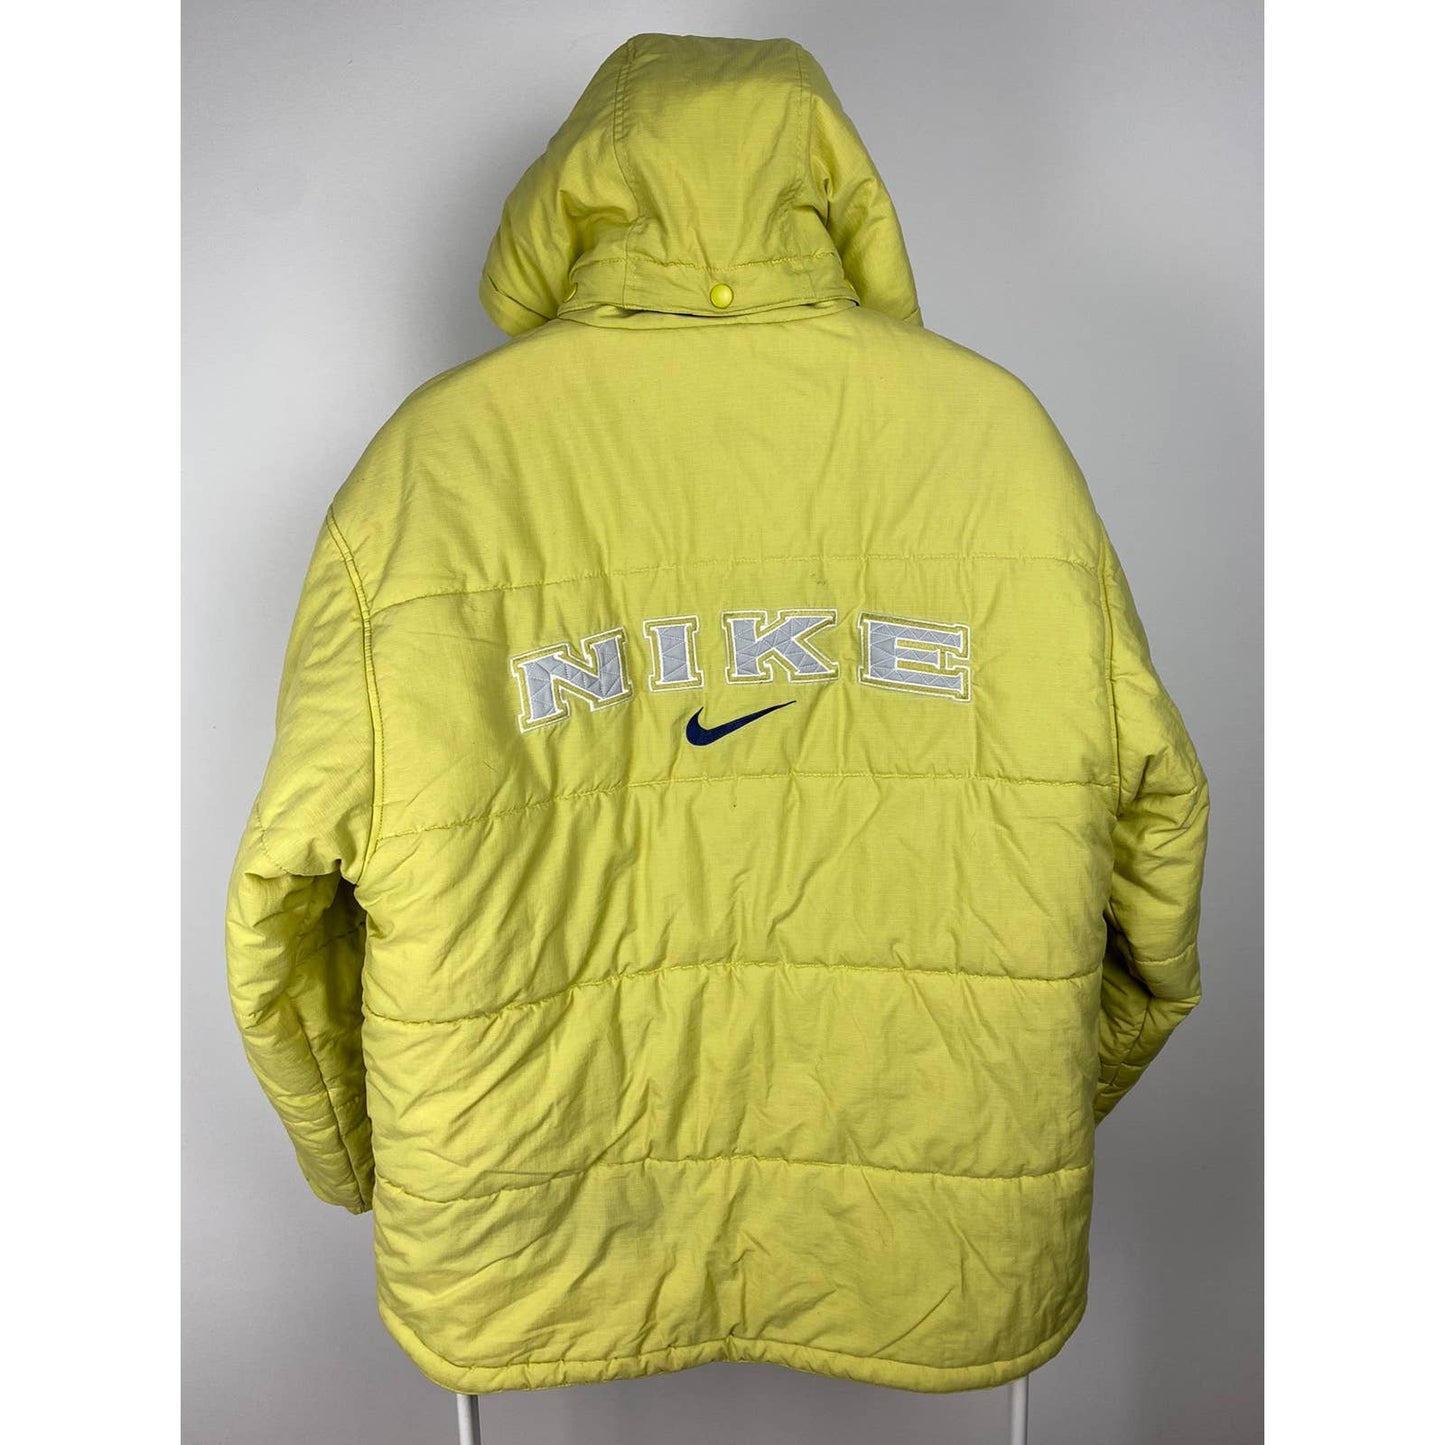 90s Nike vintage spell out puffer jacket small swoosh